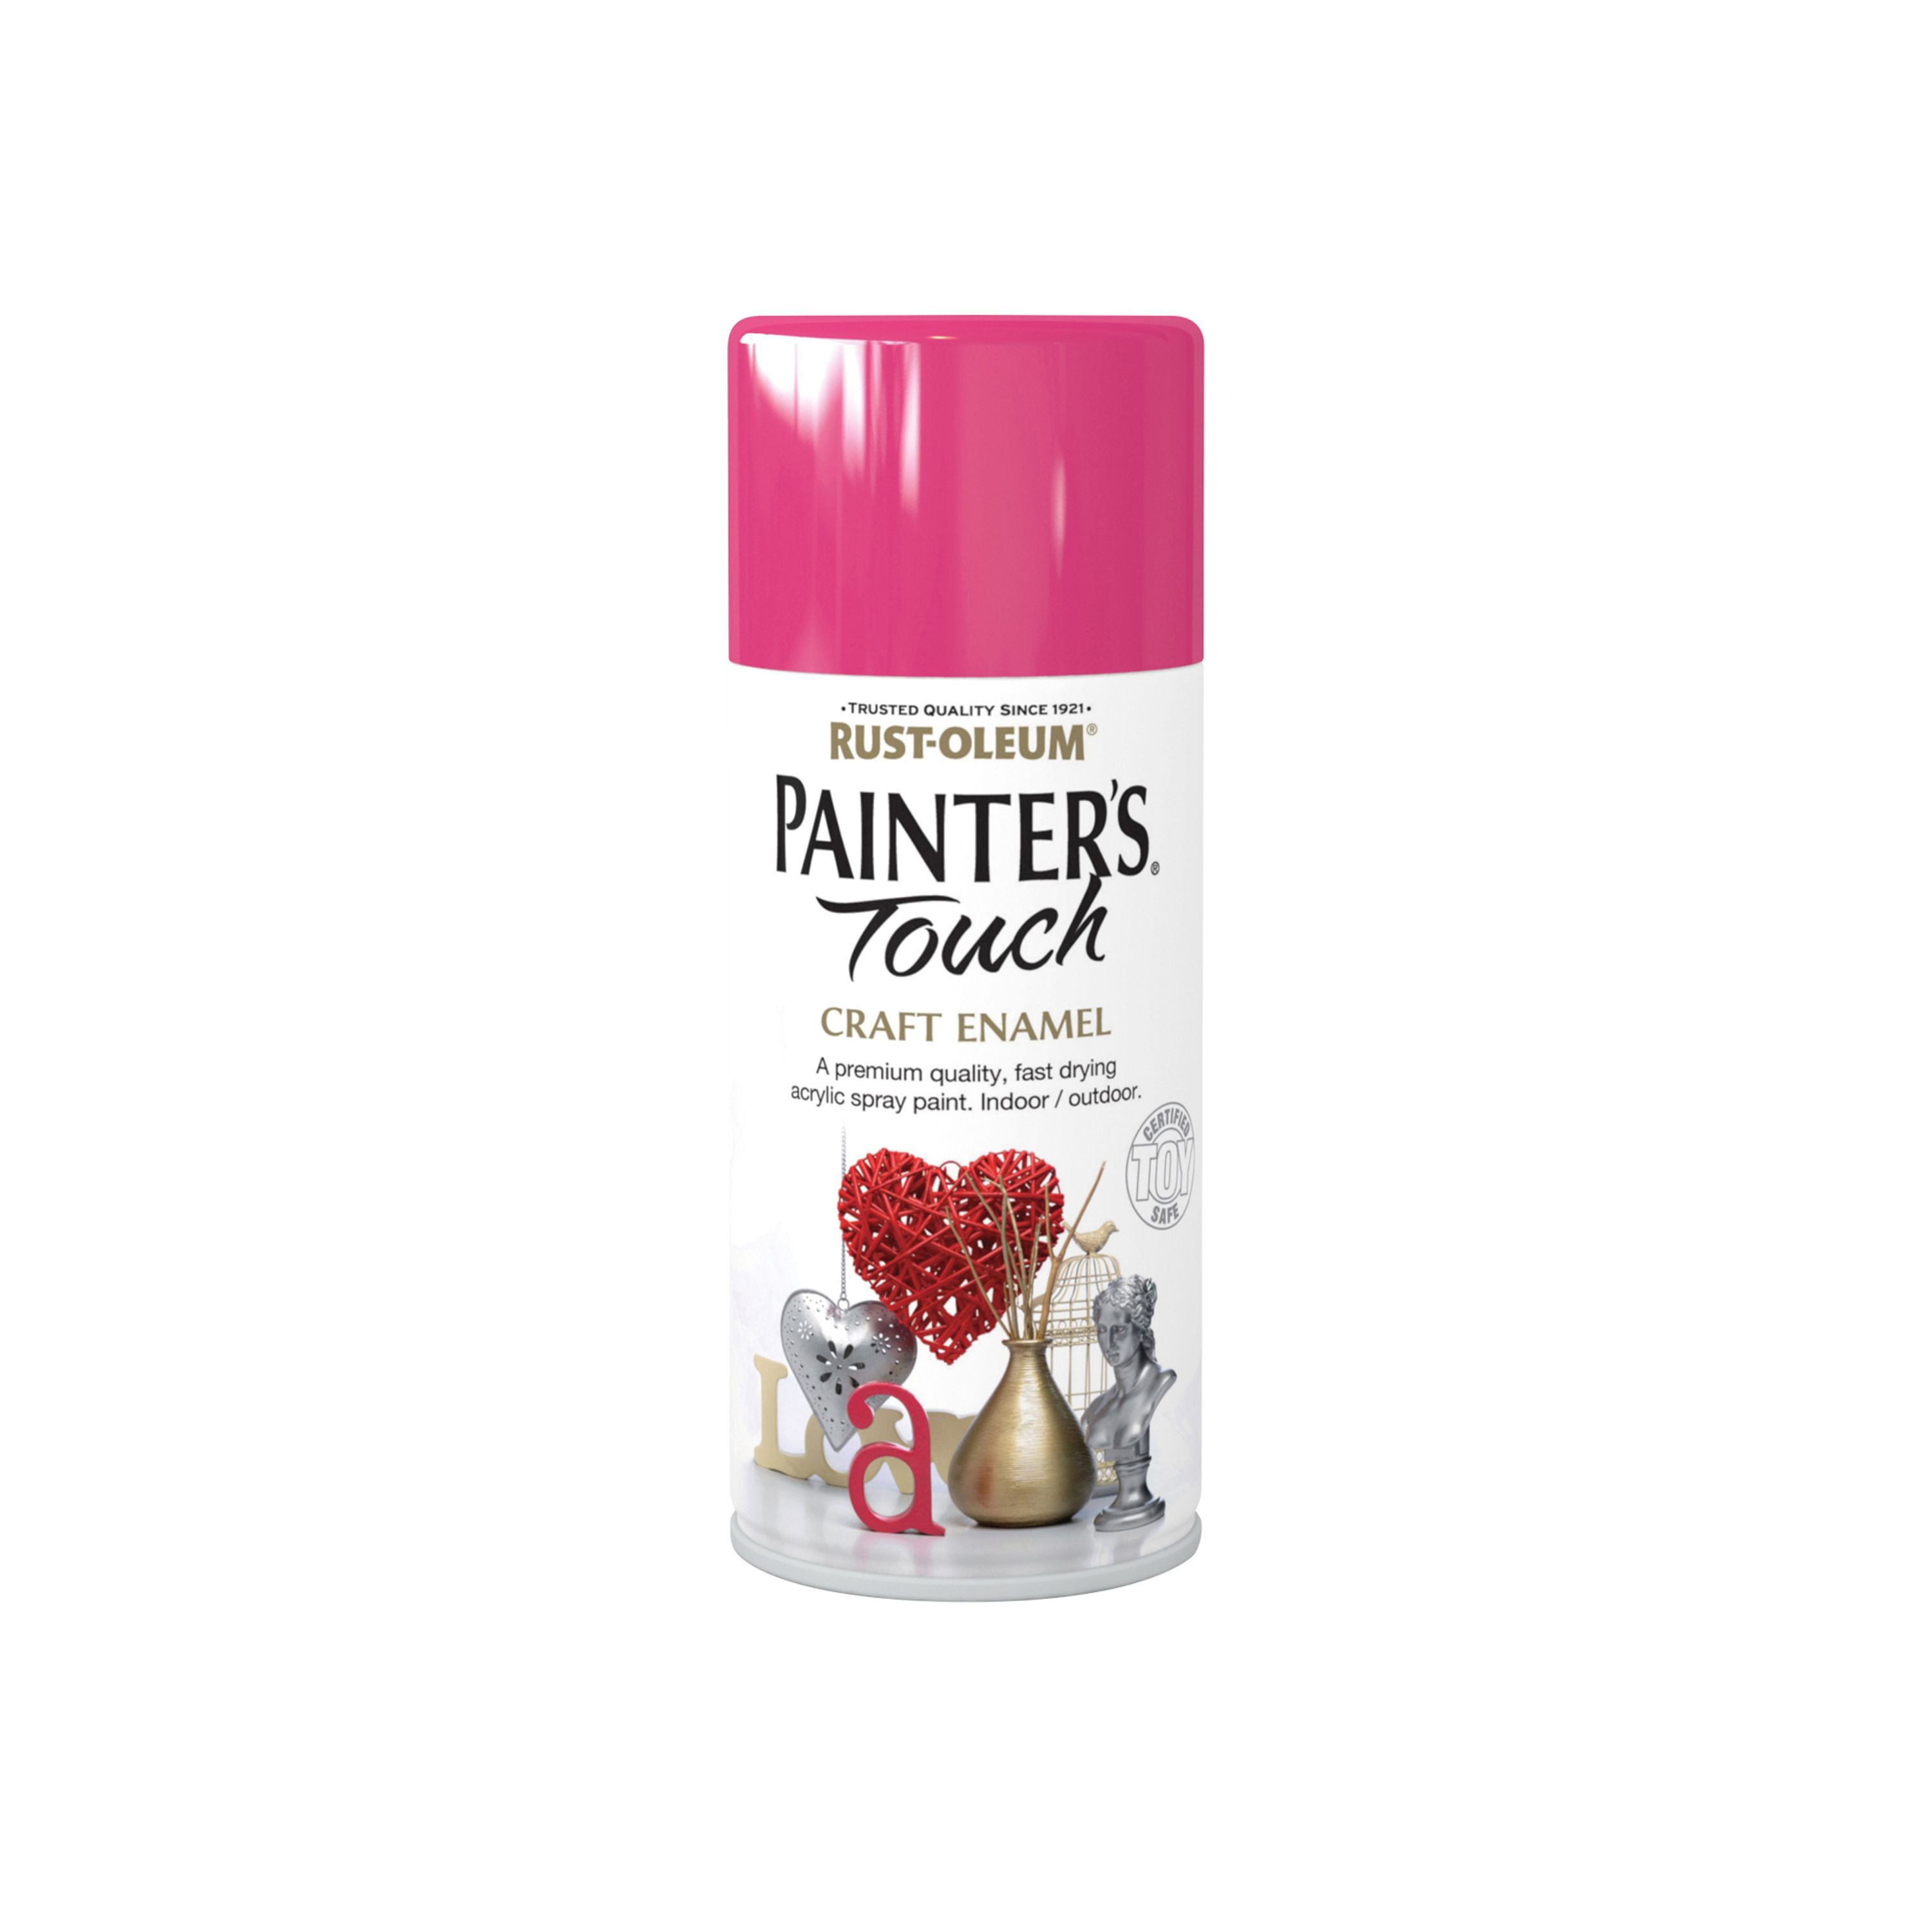 Rust-Oleum Painter's Touch Blossom pink Gloss Multi-surface Decorative spray paint, 150ml